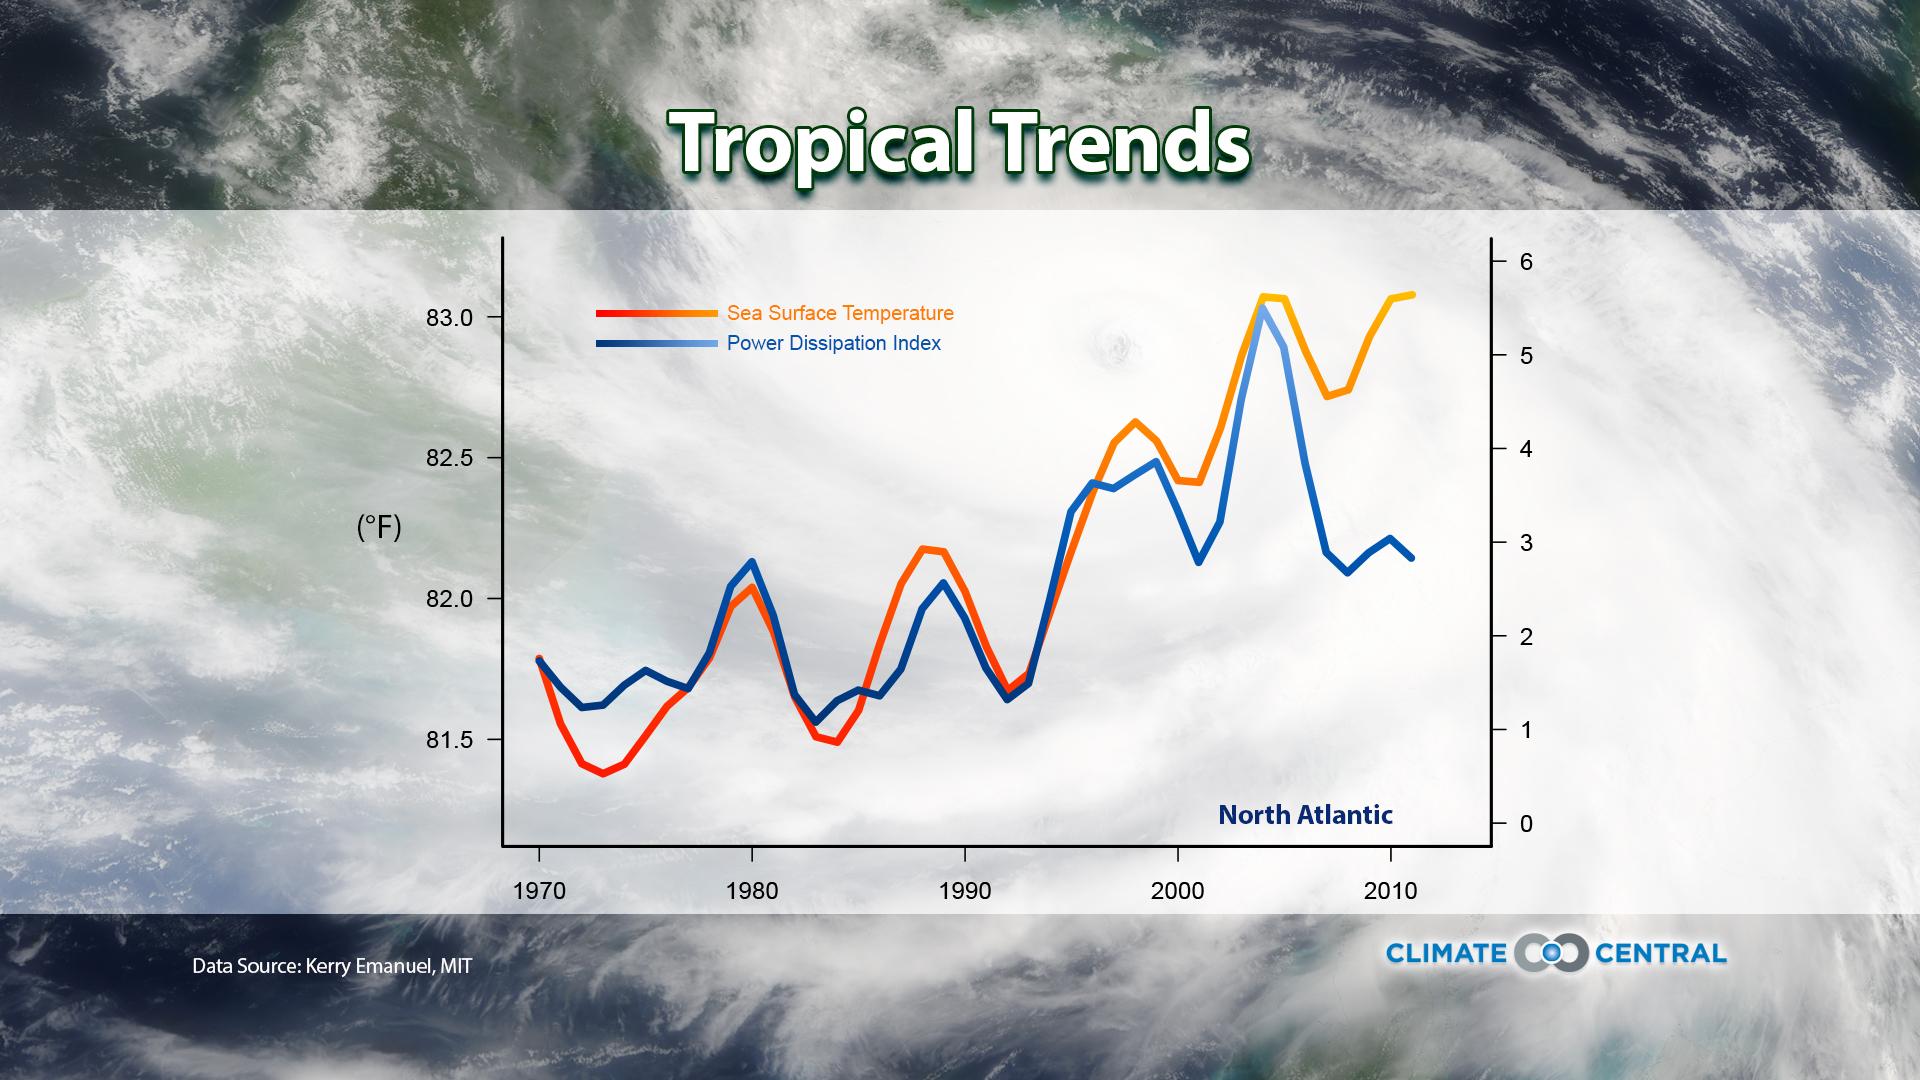 Set 1 - Tropical Trends: Power Dissipation Index